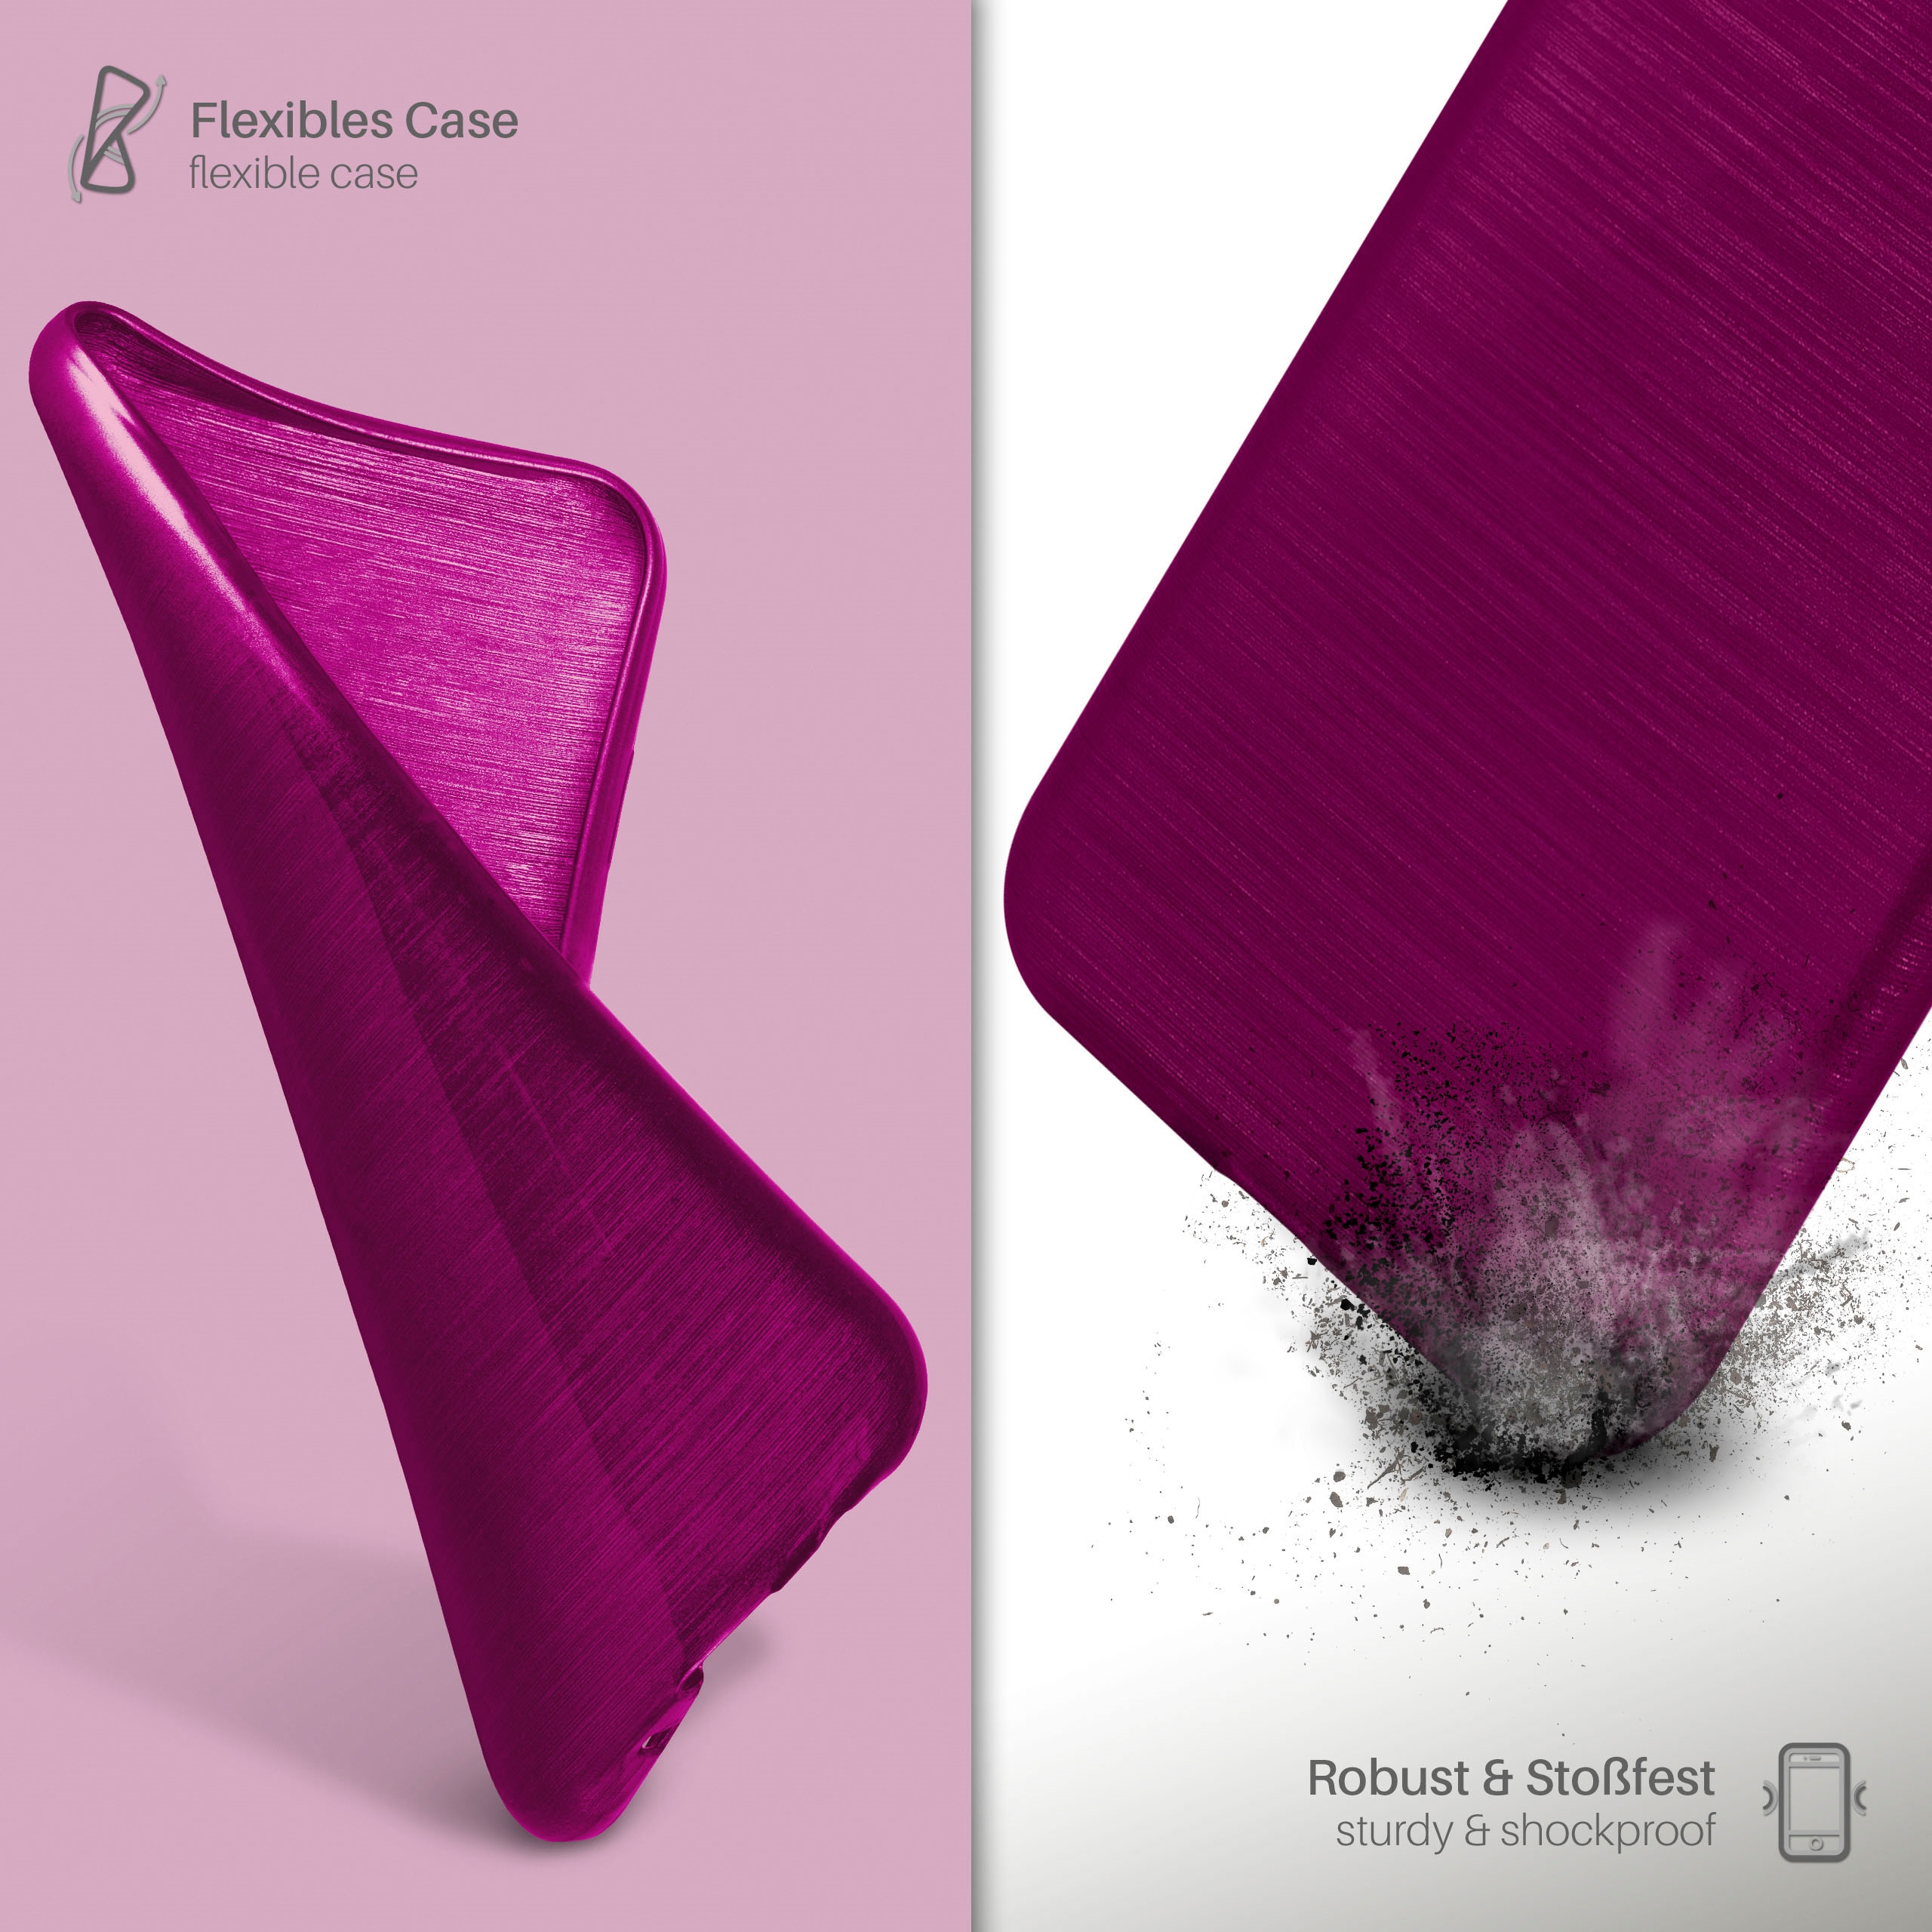 MOEX Brushed Case, Backcover, / 4, iPhone iPhone Purpure-Purple Apple, 4s